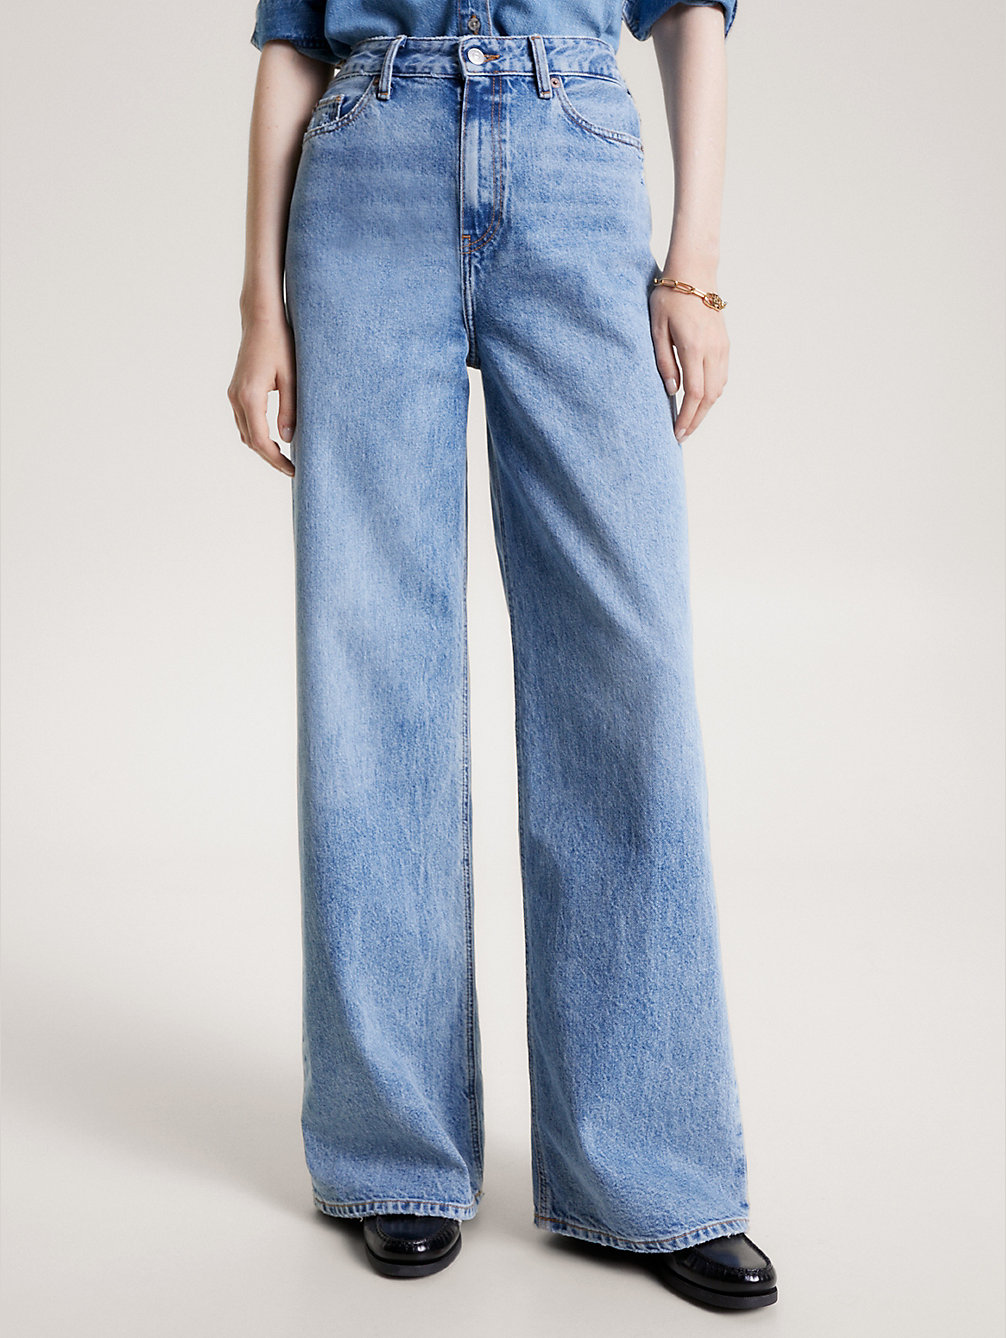 denim high rise wide leg faded jeans for women tommy hilfiger